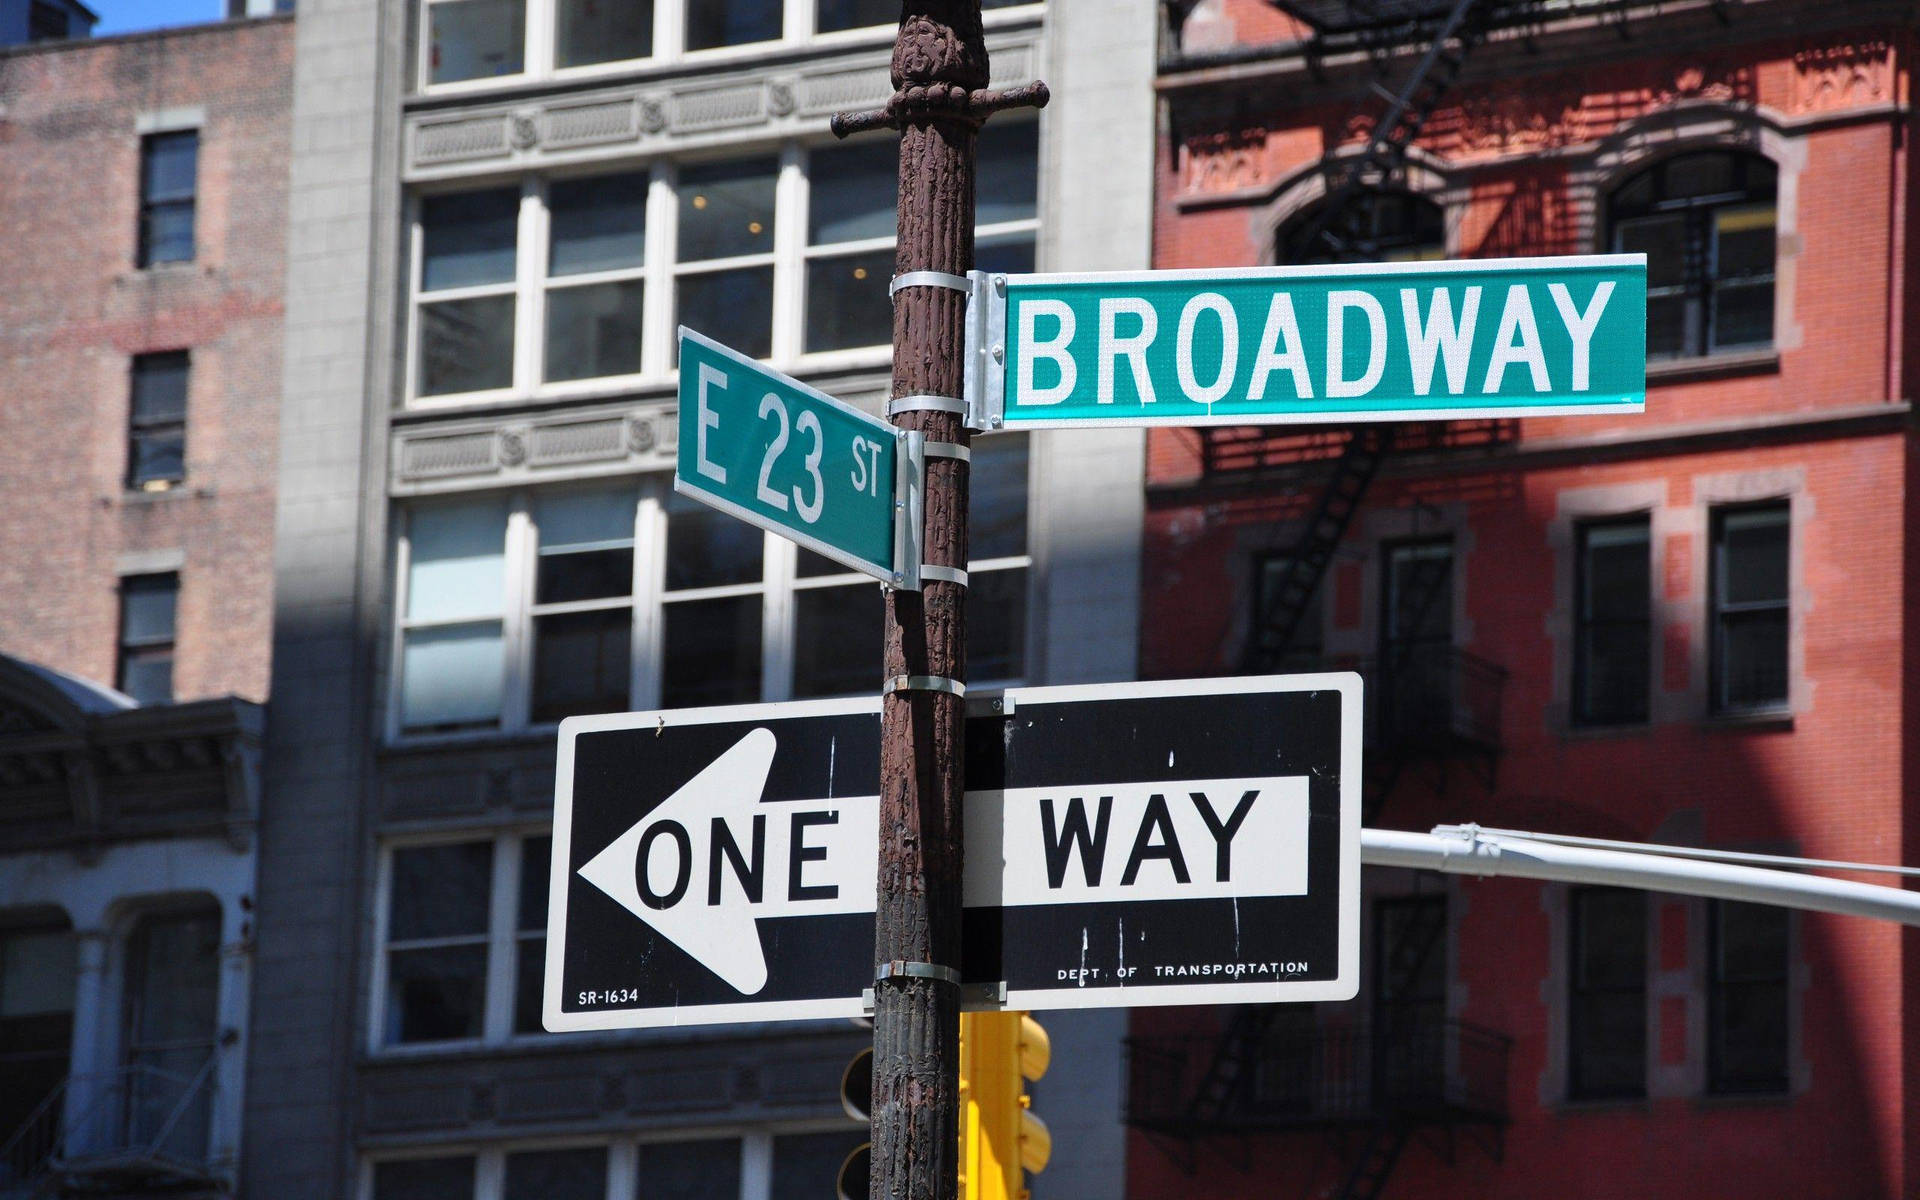 New York's Lively Broadway Is Where Amazing Talent Comes Together